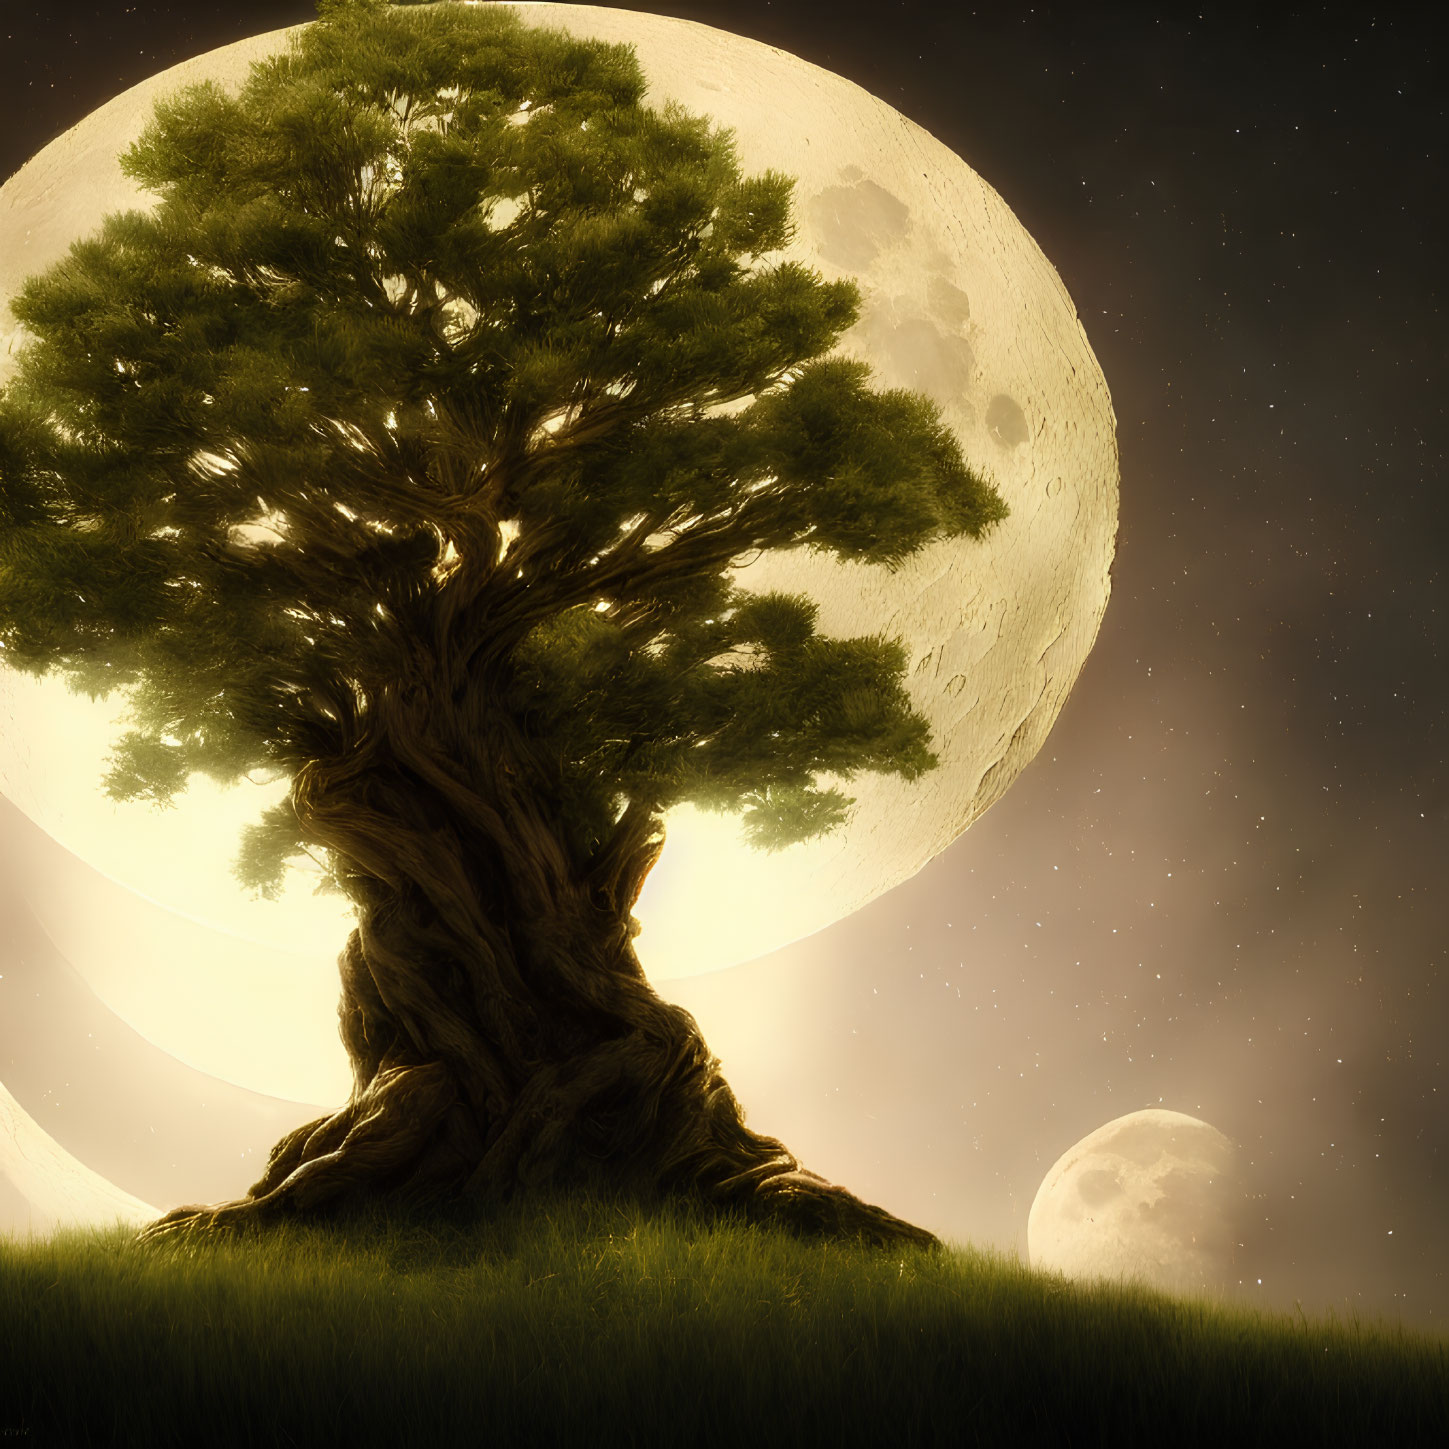 Majestic twisted trunk tree in field under starry sky with full moon